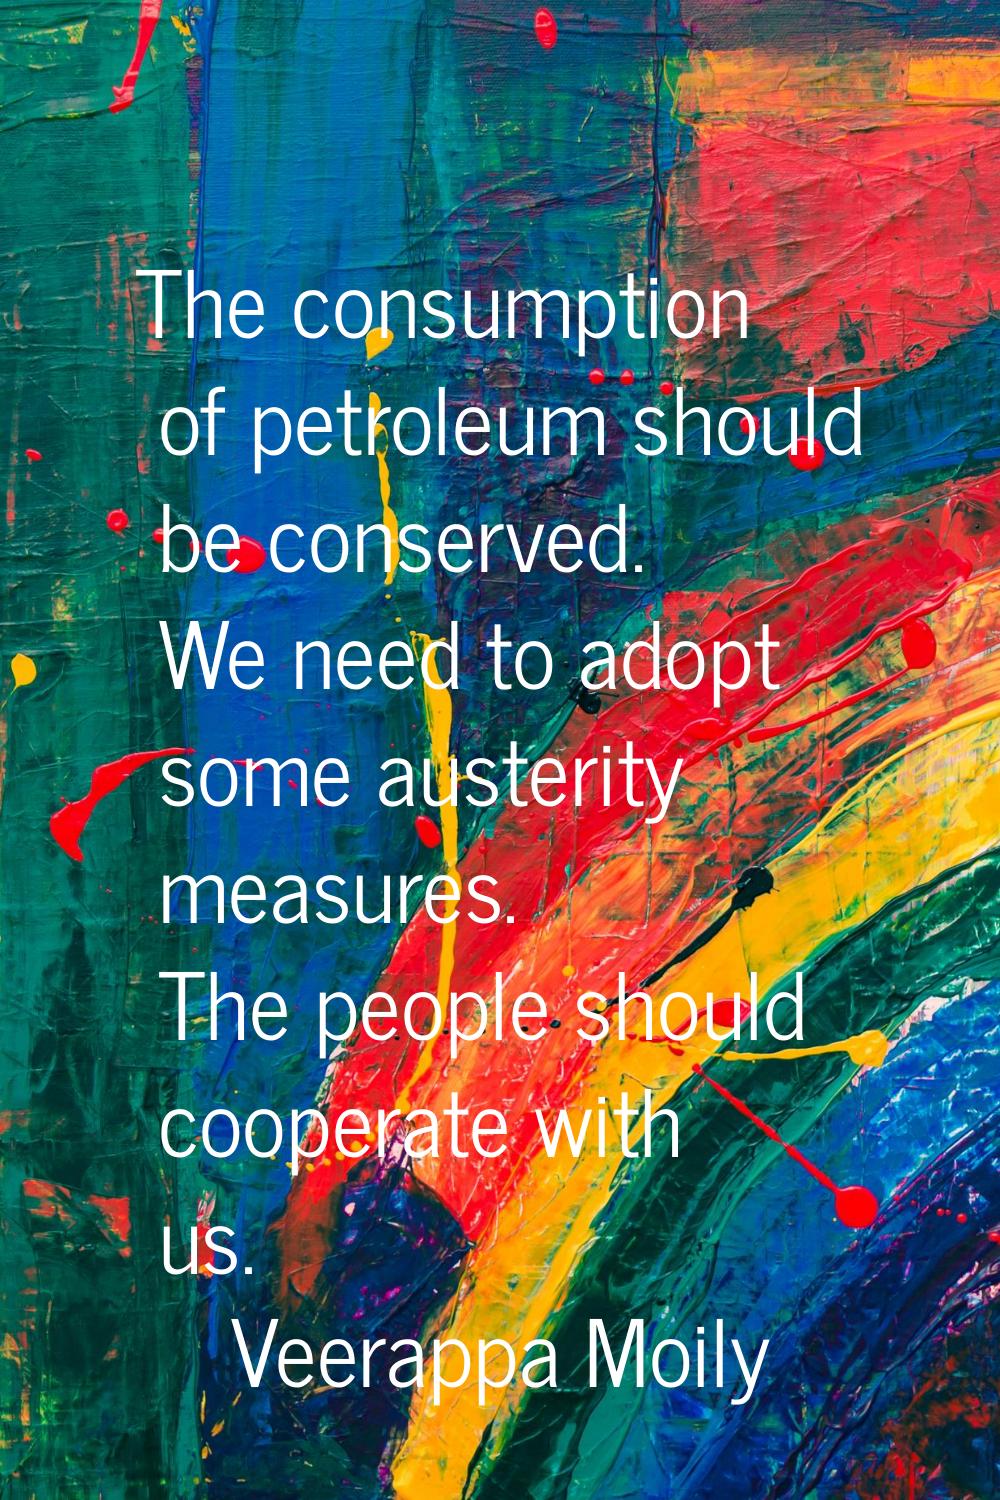 The consumption of petroleum should be conserved. We need to adopt some austerity measures. The peo